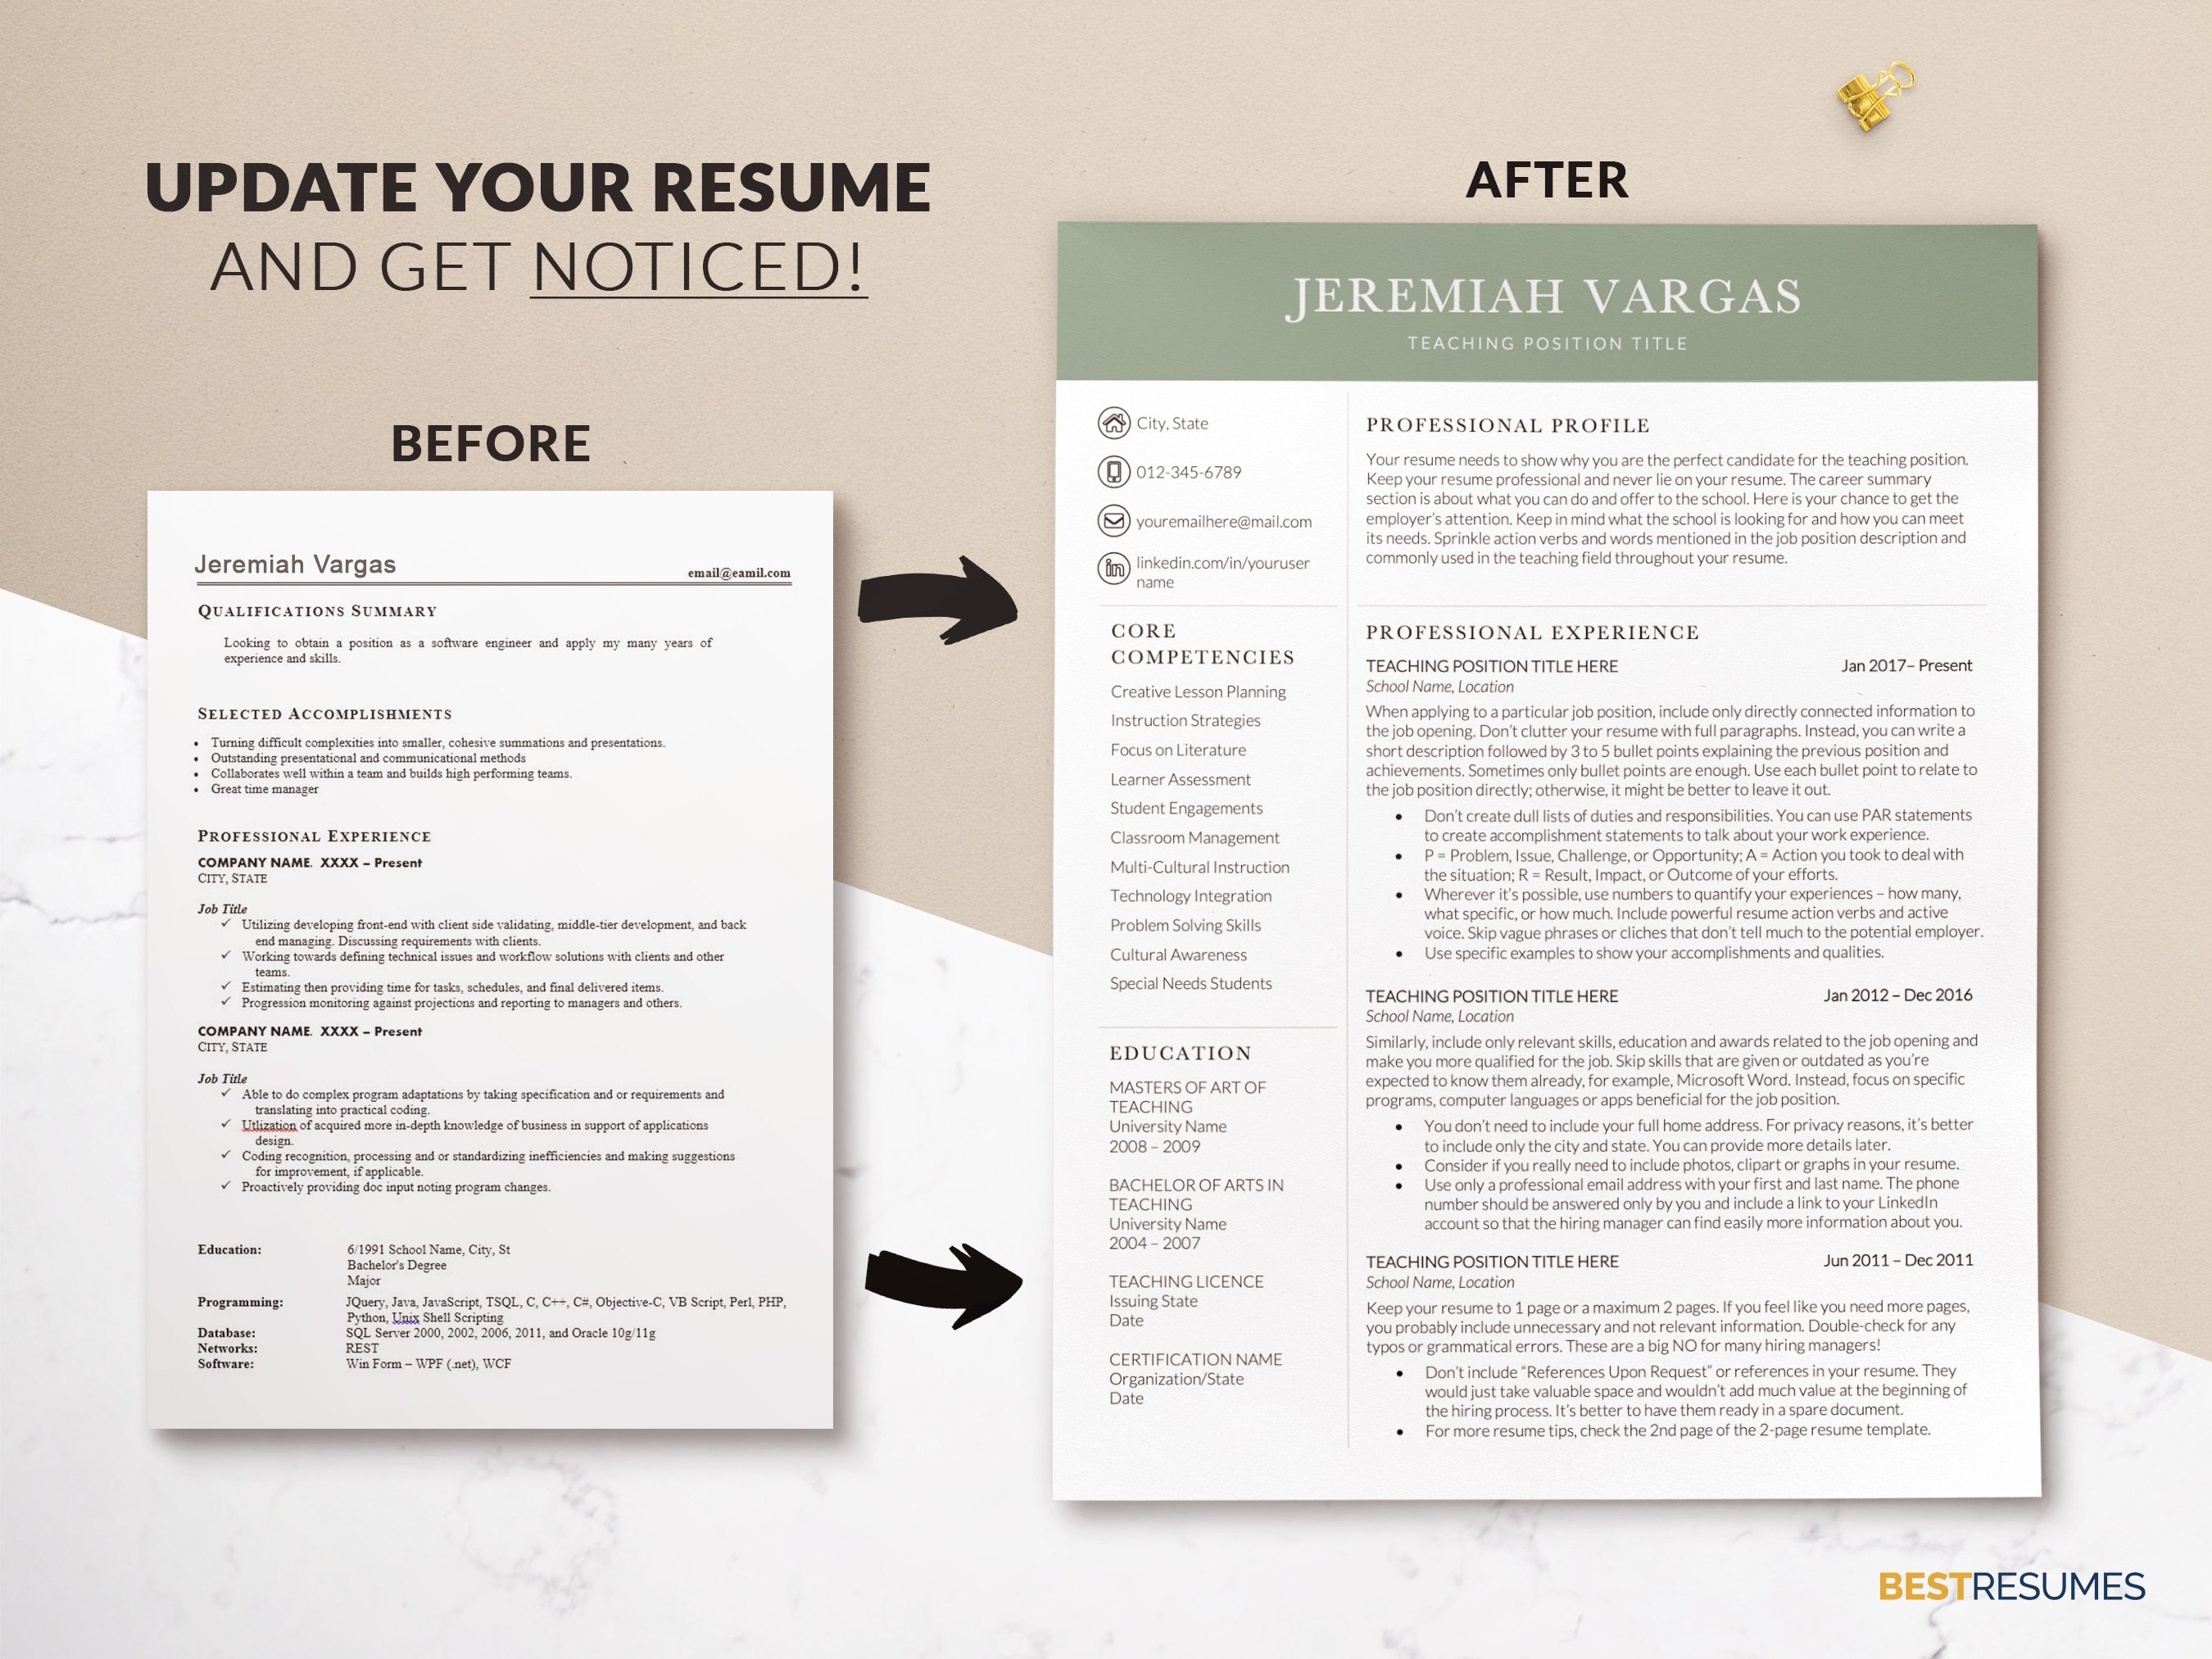 resume template for teachers update your resume jeremiah vargas 562